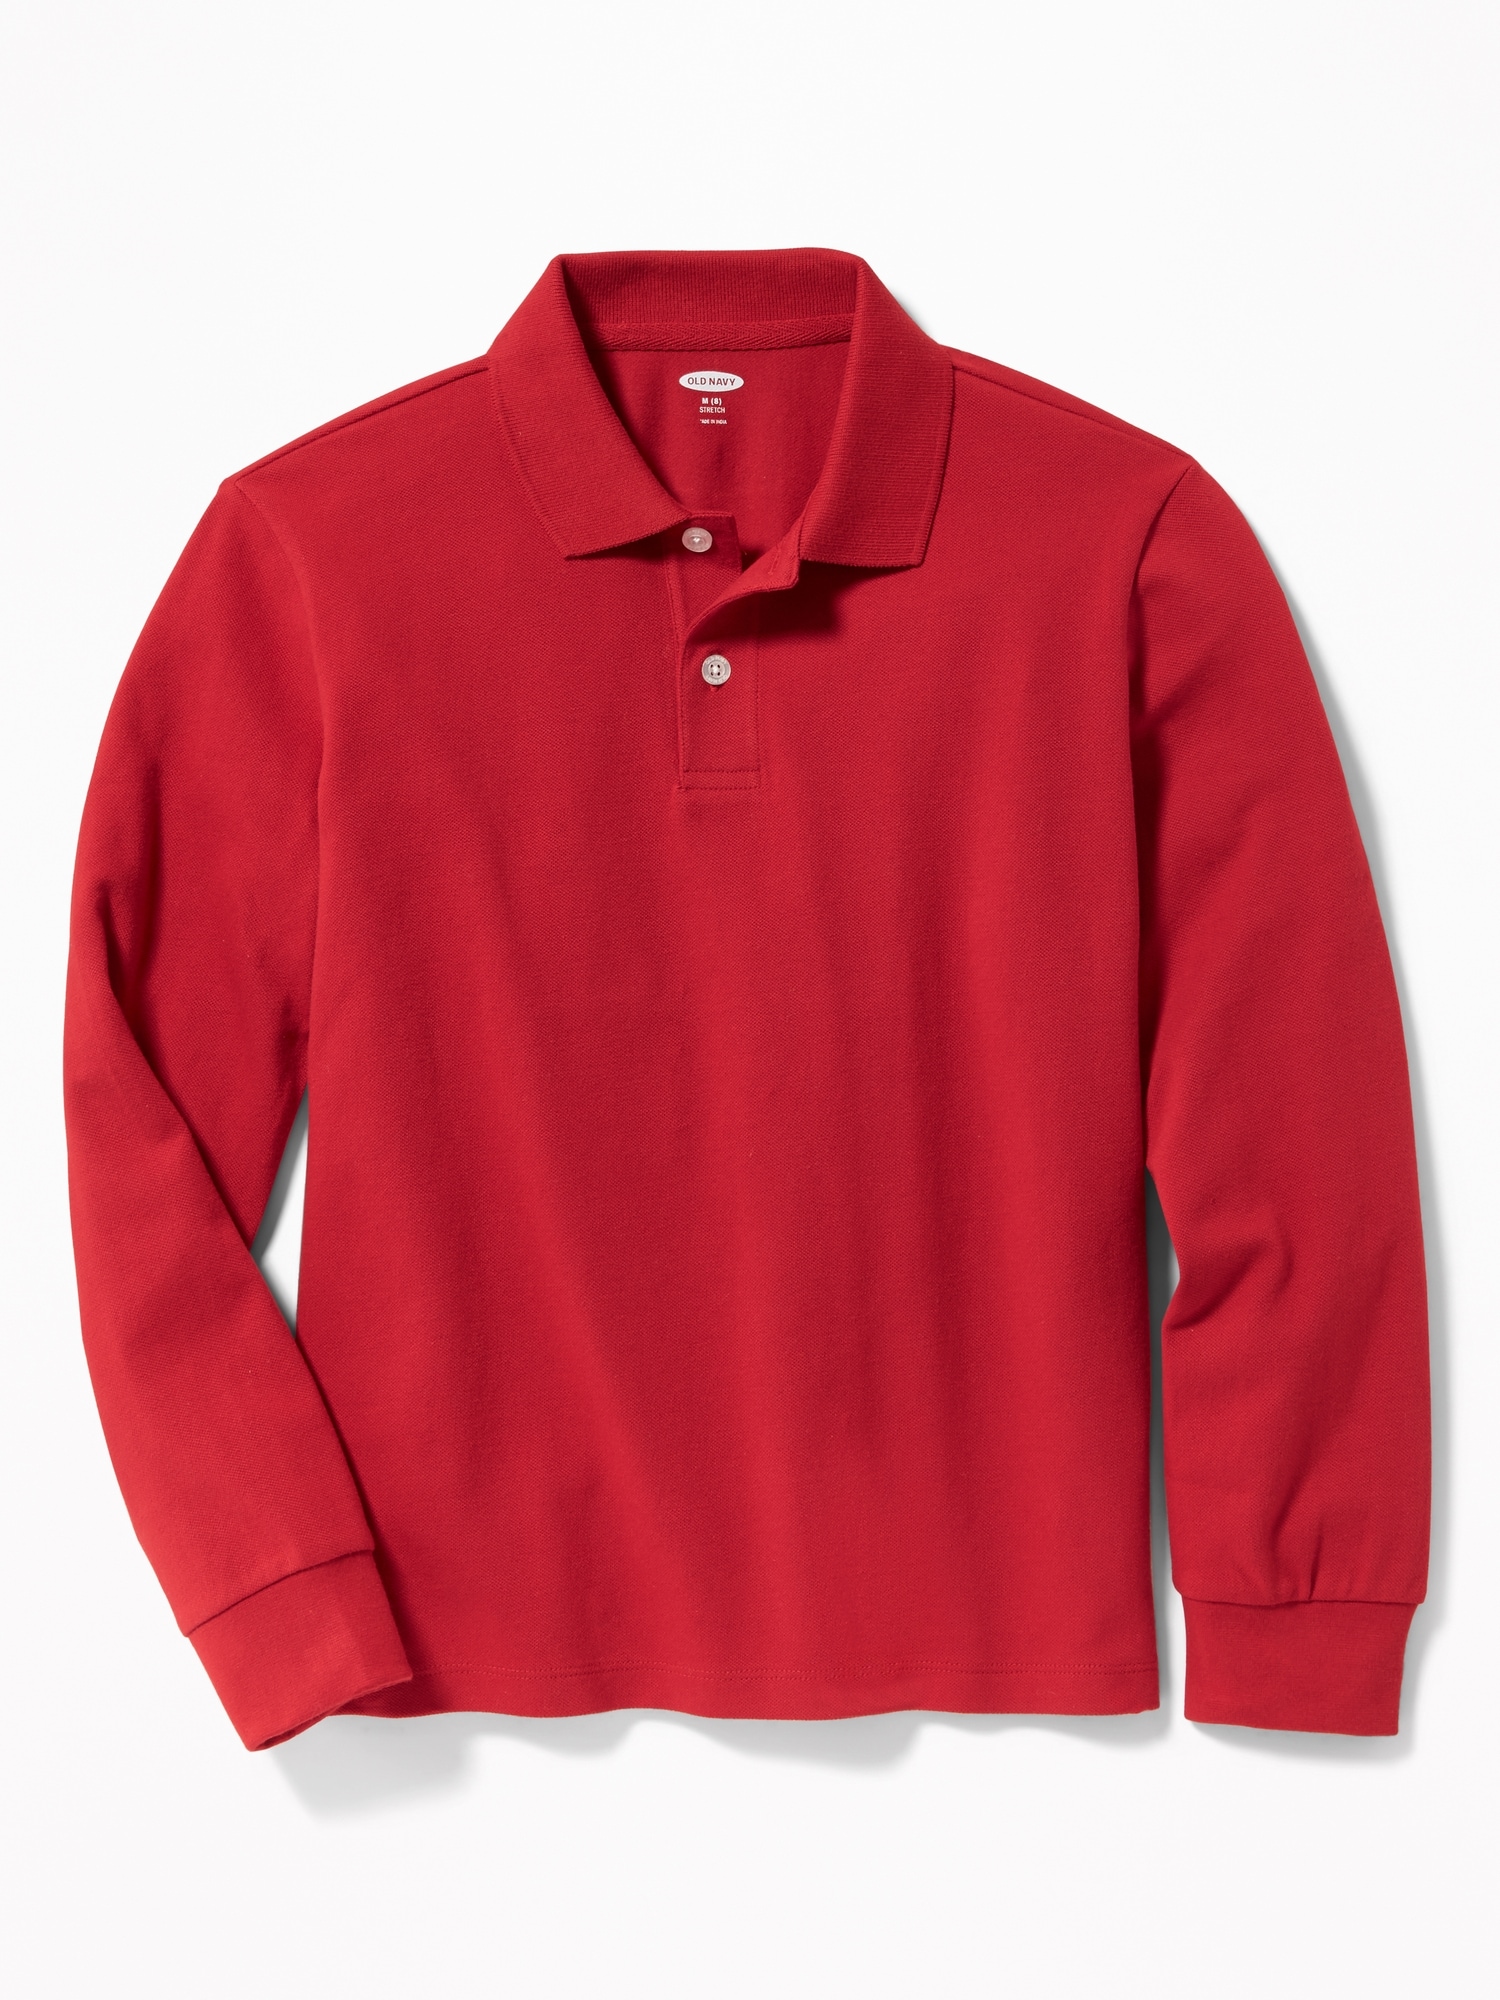 Old Navy School Uniform Long-Sleeve Polo Shirt for Boys red. 1